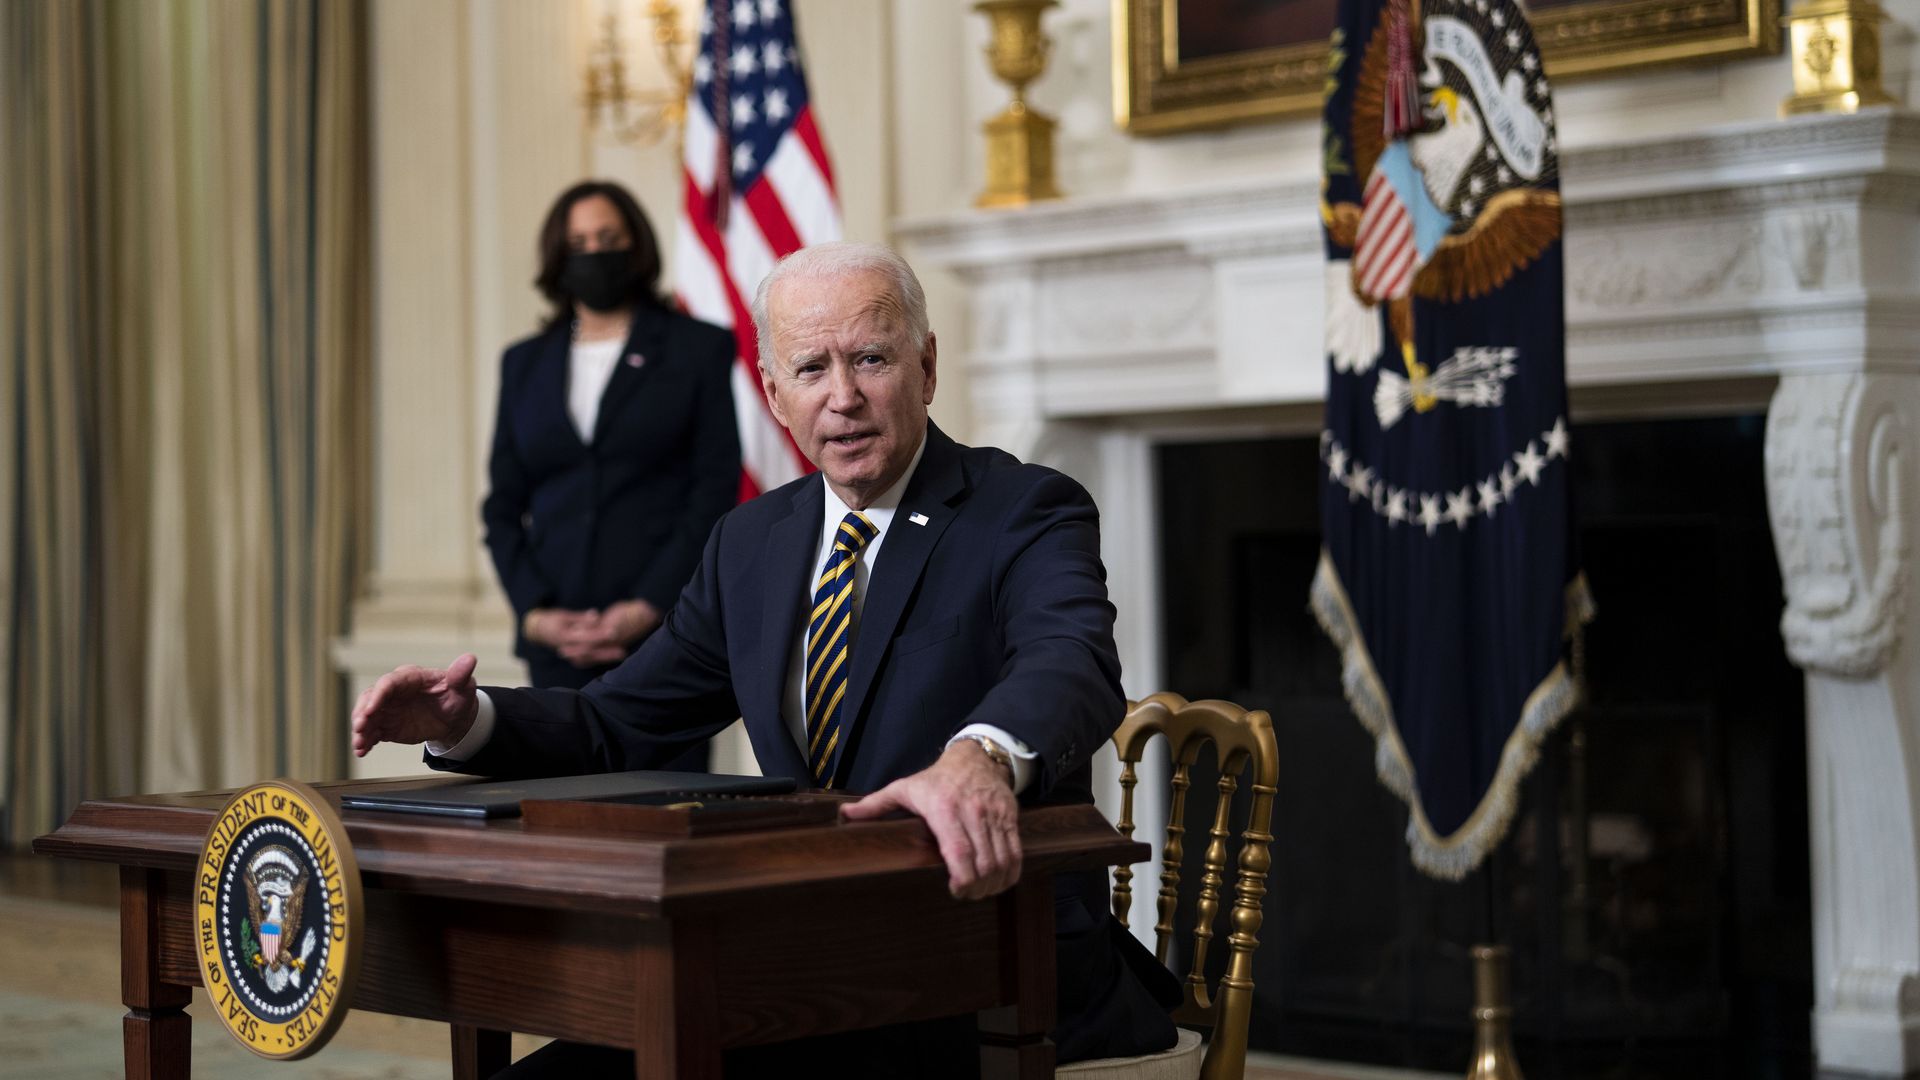 President Biden with signing executive orders with Vice President Harris in the background in the White House on Feb. 24.